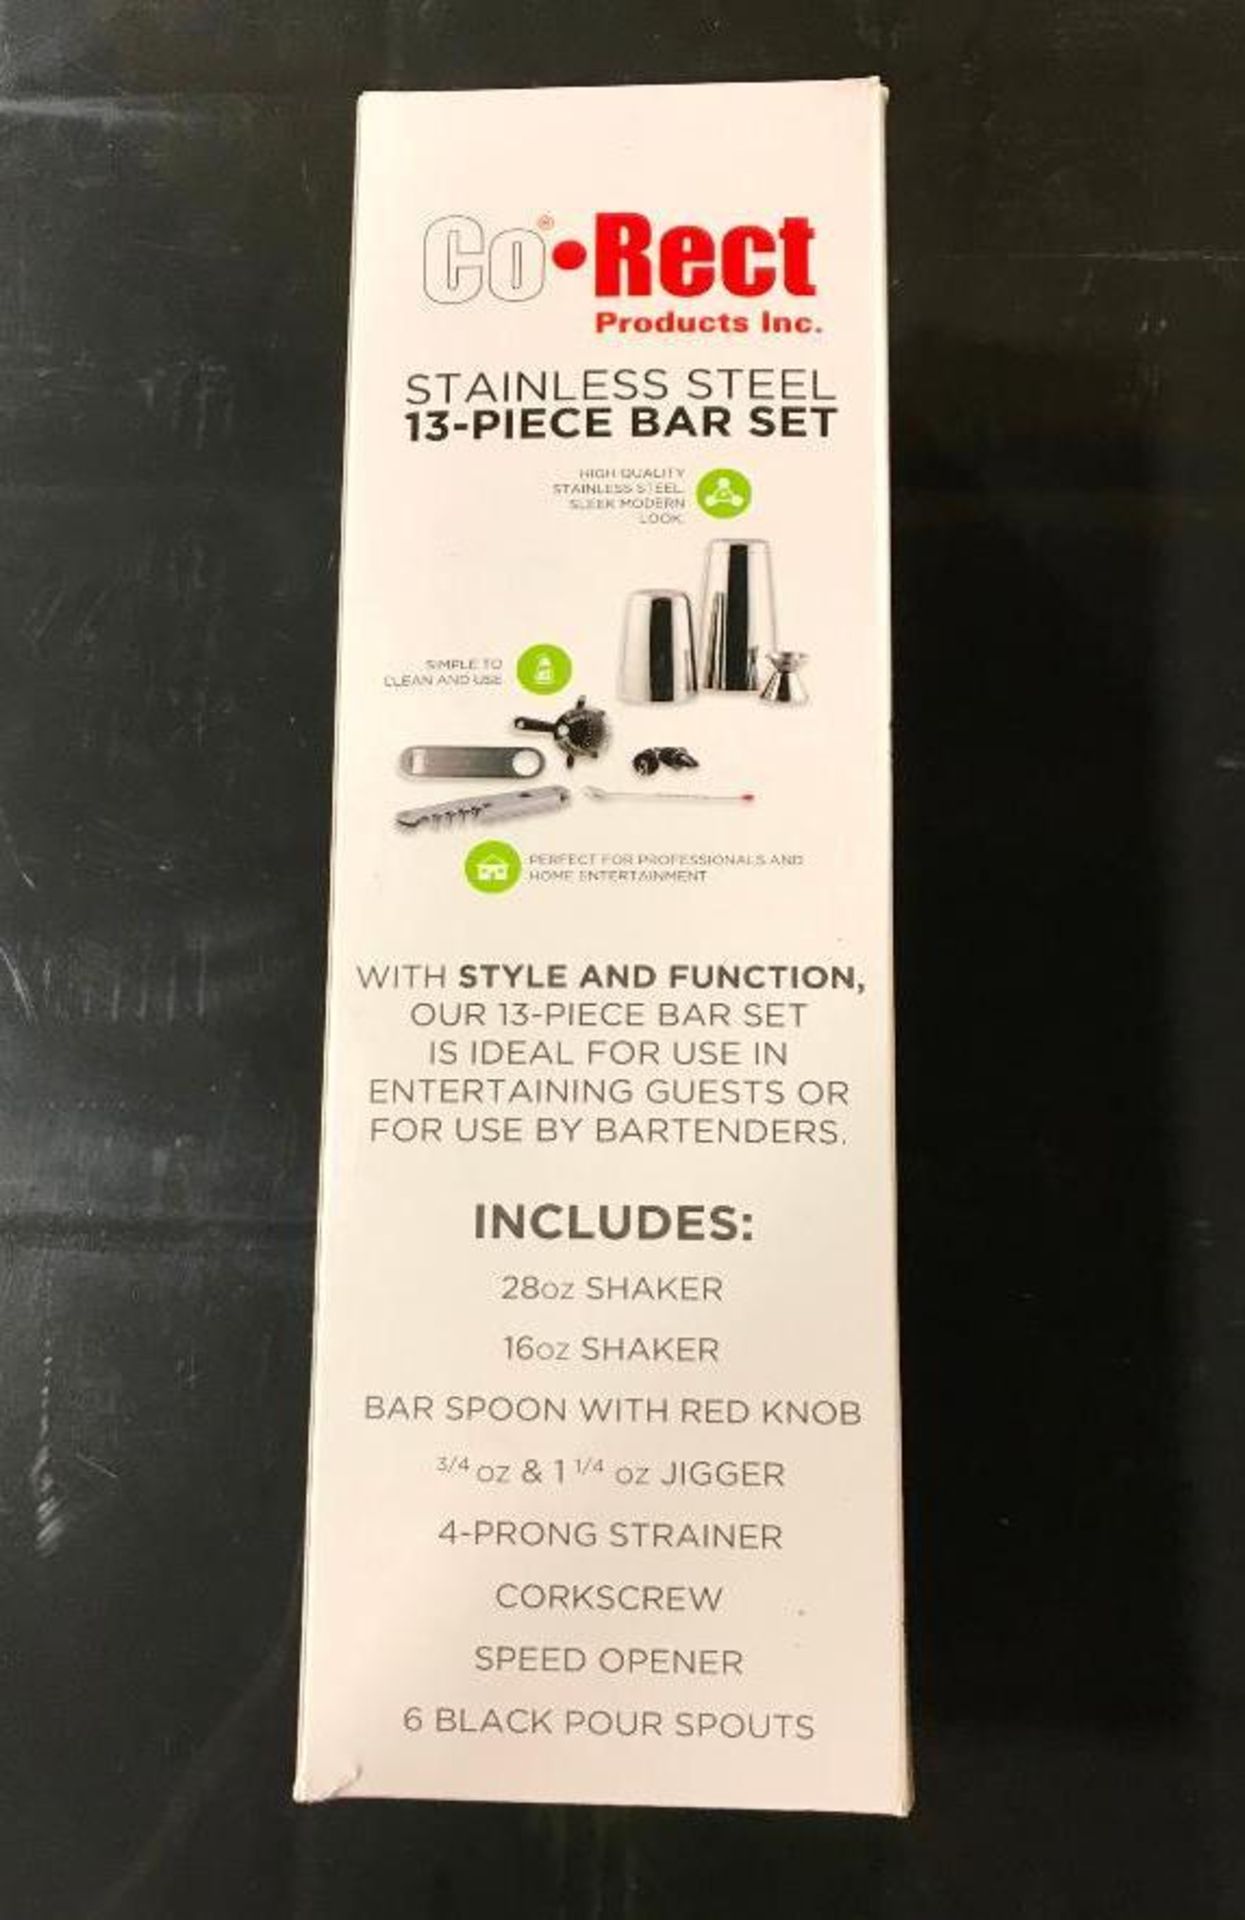 13 PIECE STAINLESS STEEL HOME BAR STARTER SET, CO-RECT BS207 - NEW - Image 2 of 6